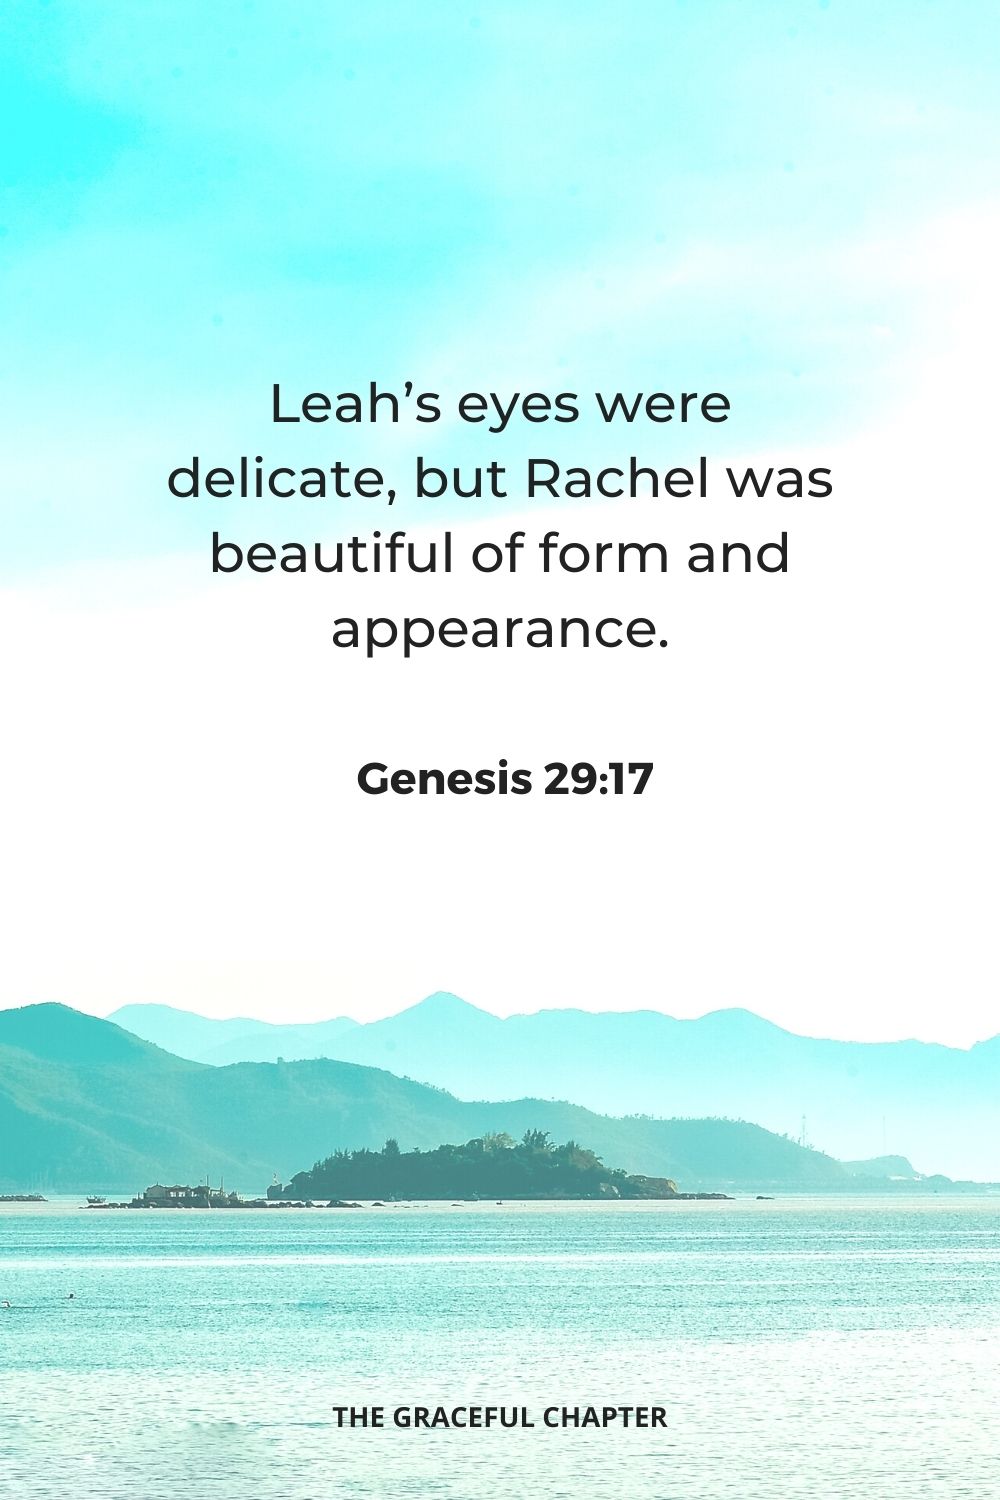 Leah’s eyes were delicate, but Rachel was beautiful of form and appearance.